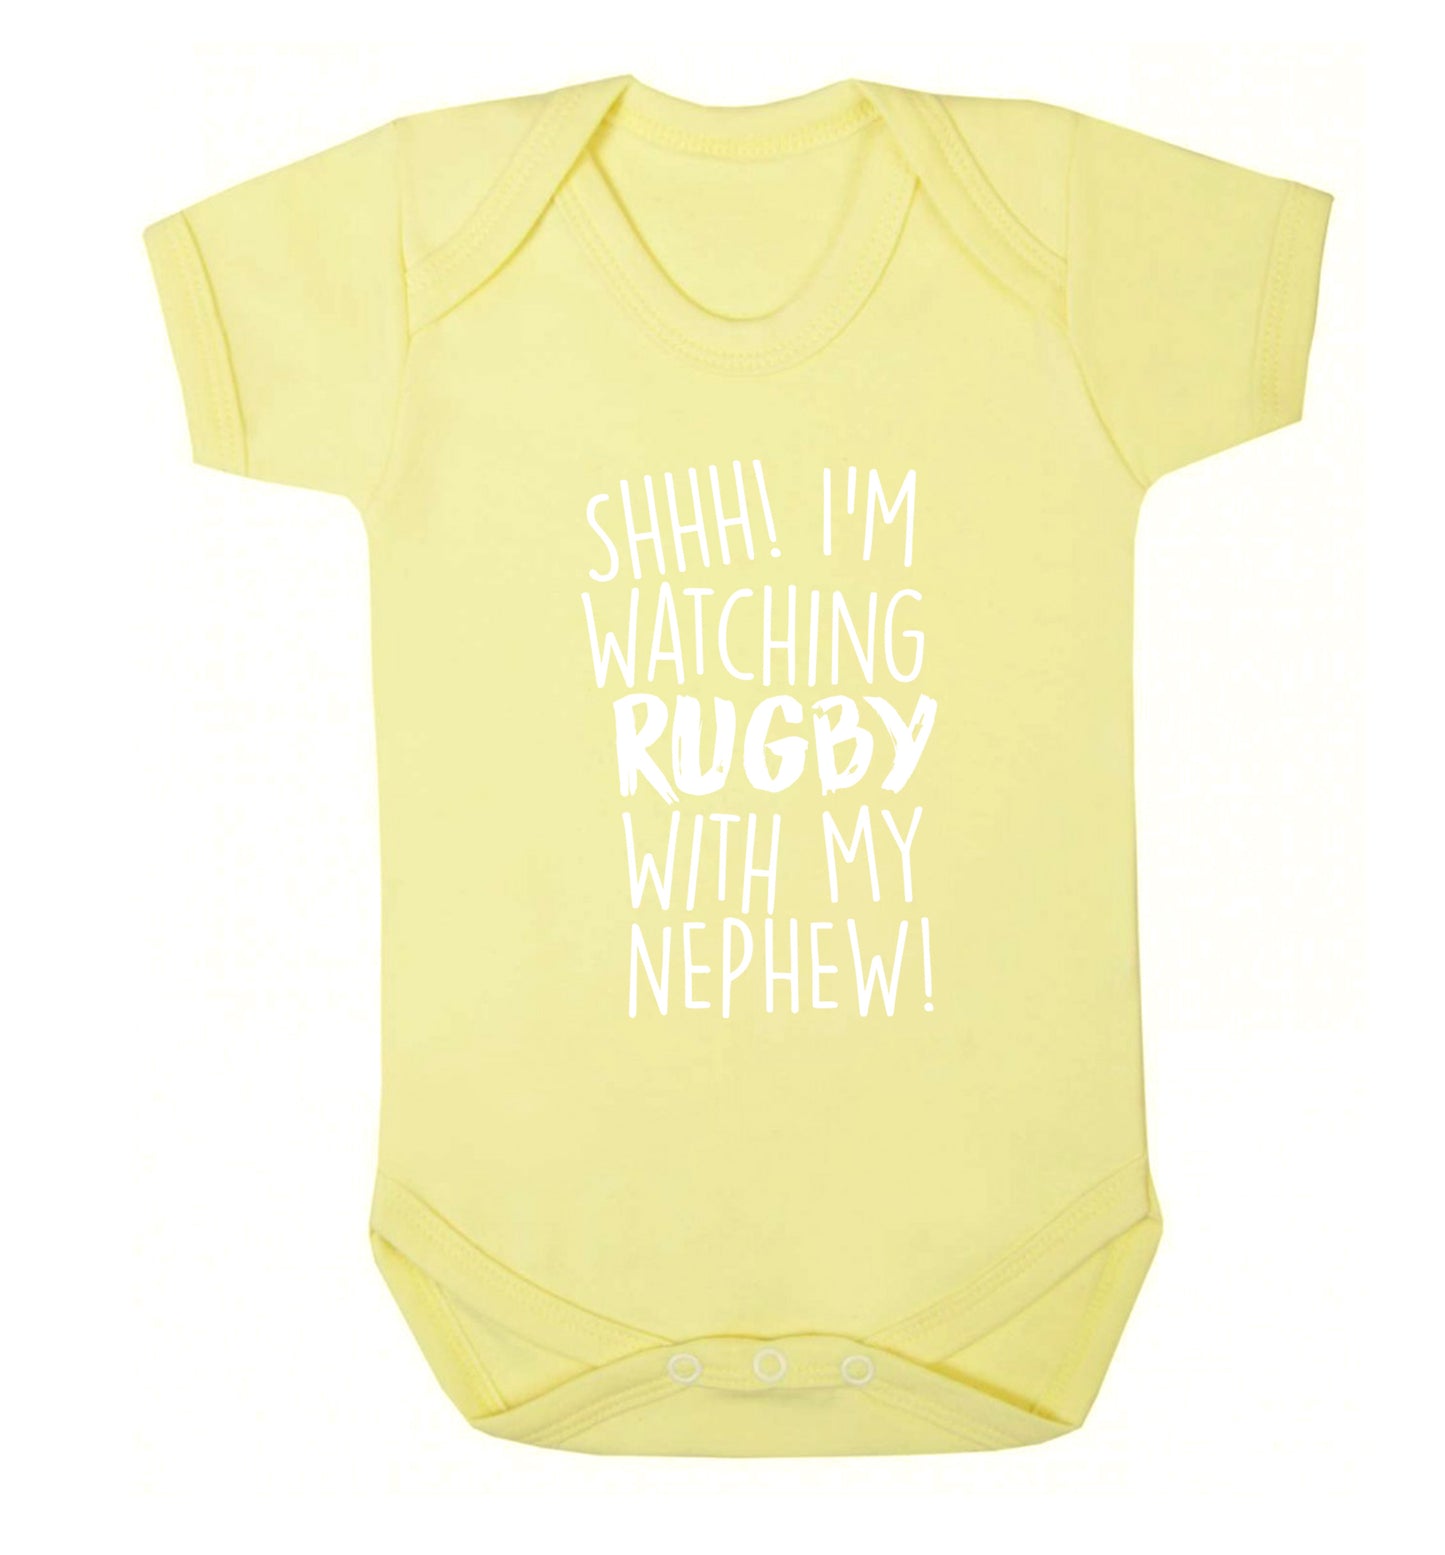 Shh.. I'm watching rugby with my nephew Baby Vest pale yellow 18-24 months